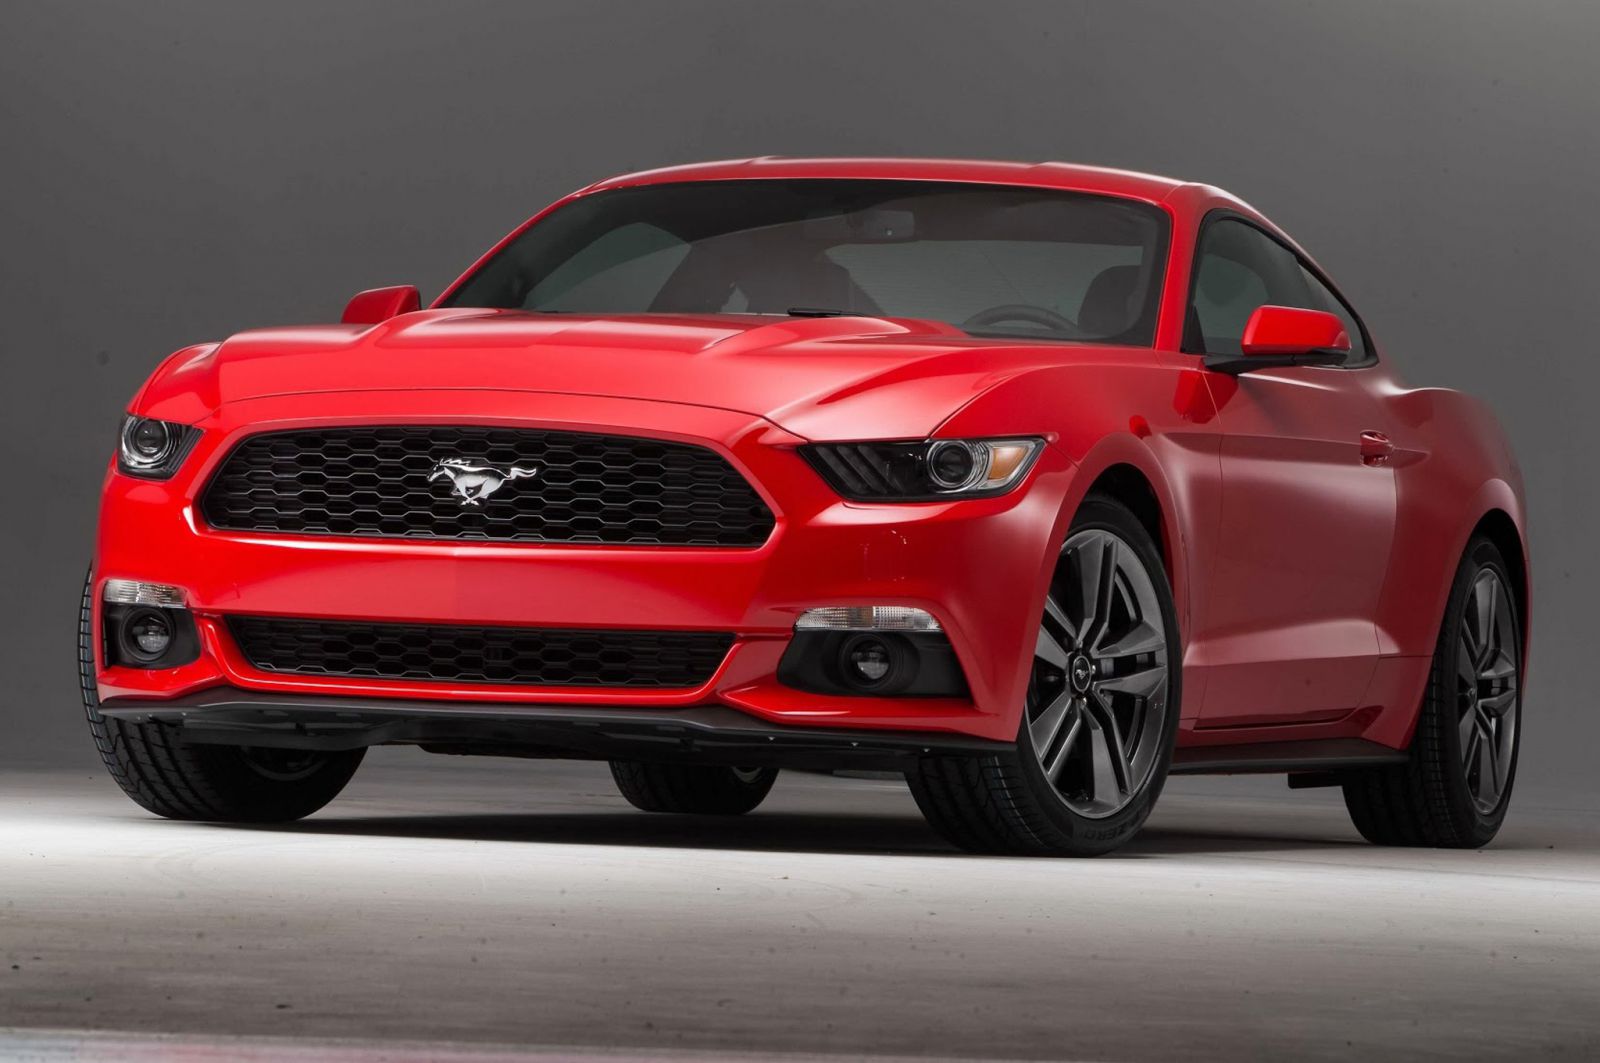 Ford Mustang Convertible: The Stylish Legend